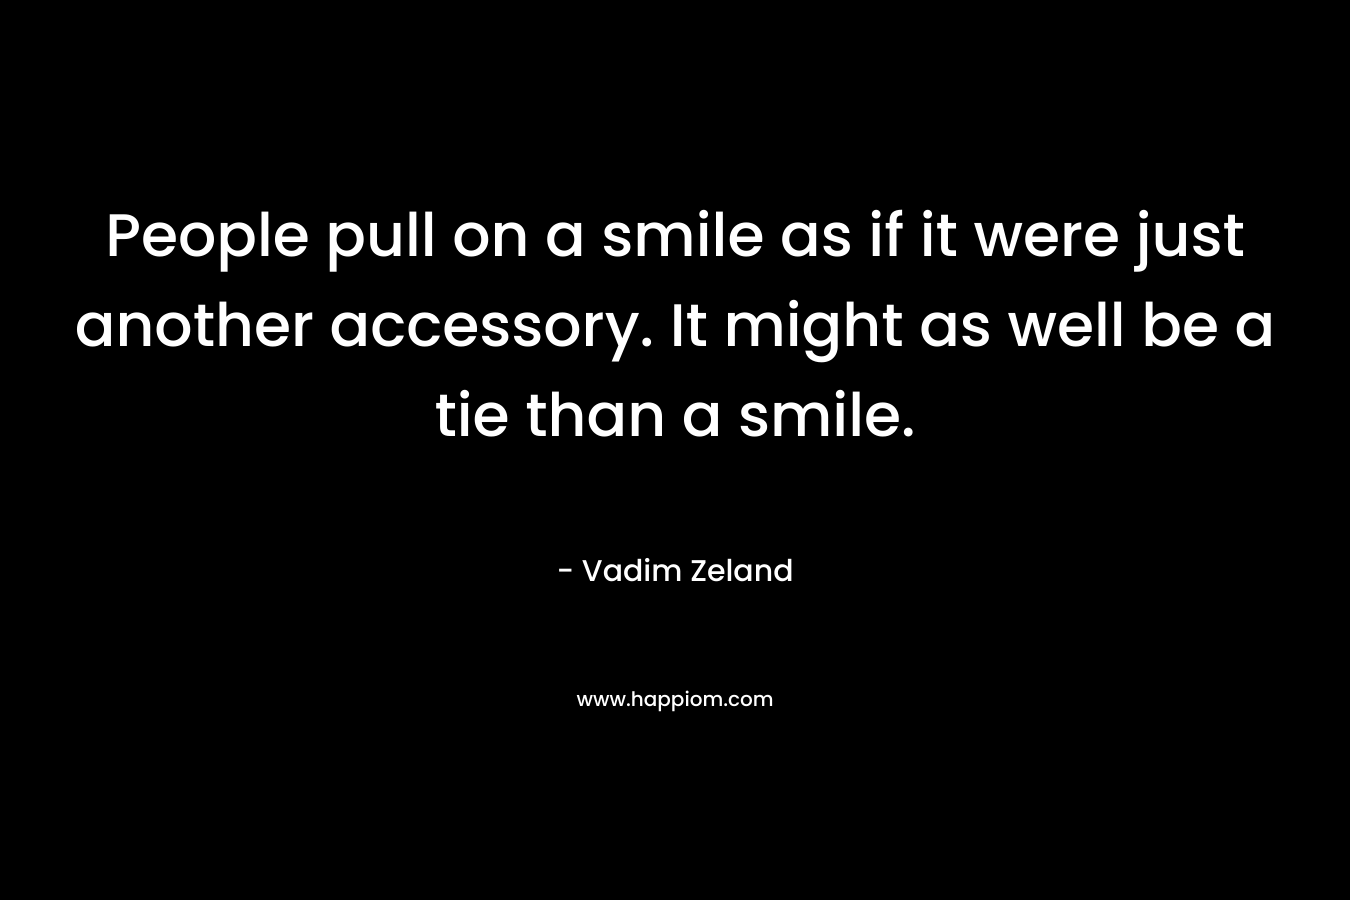 People pull on a smile as if it were just another accessory. It might as well be a tie than a smile. – Vadim Zeland